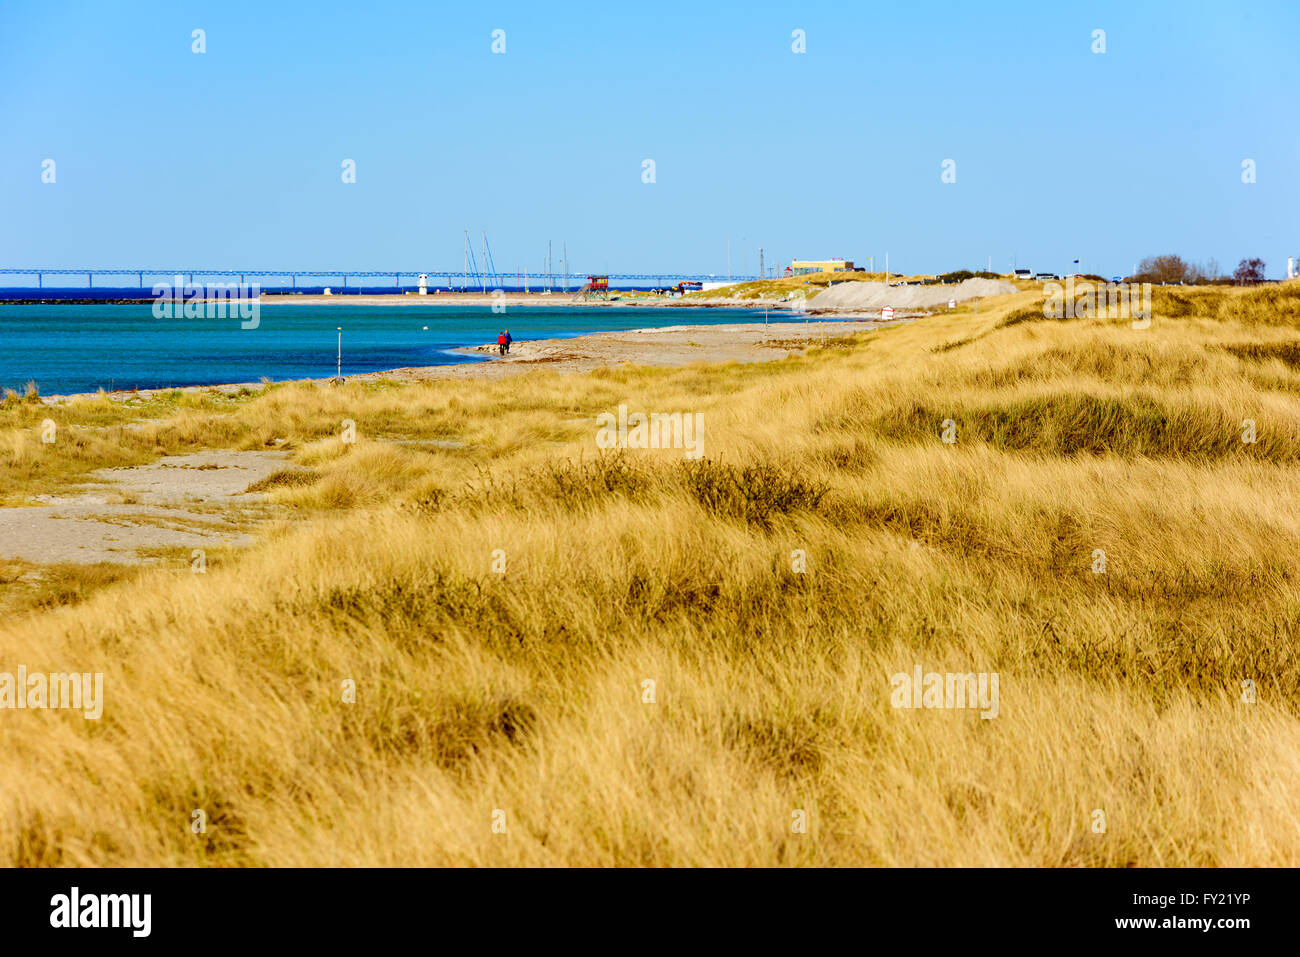 View of a part of the beach at Skanor peninsula in southern Sweden with the harbor and the bridge to Denmark of in the heat haze Stock Photo